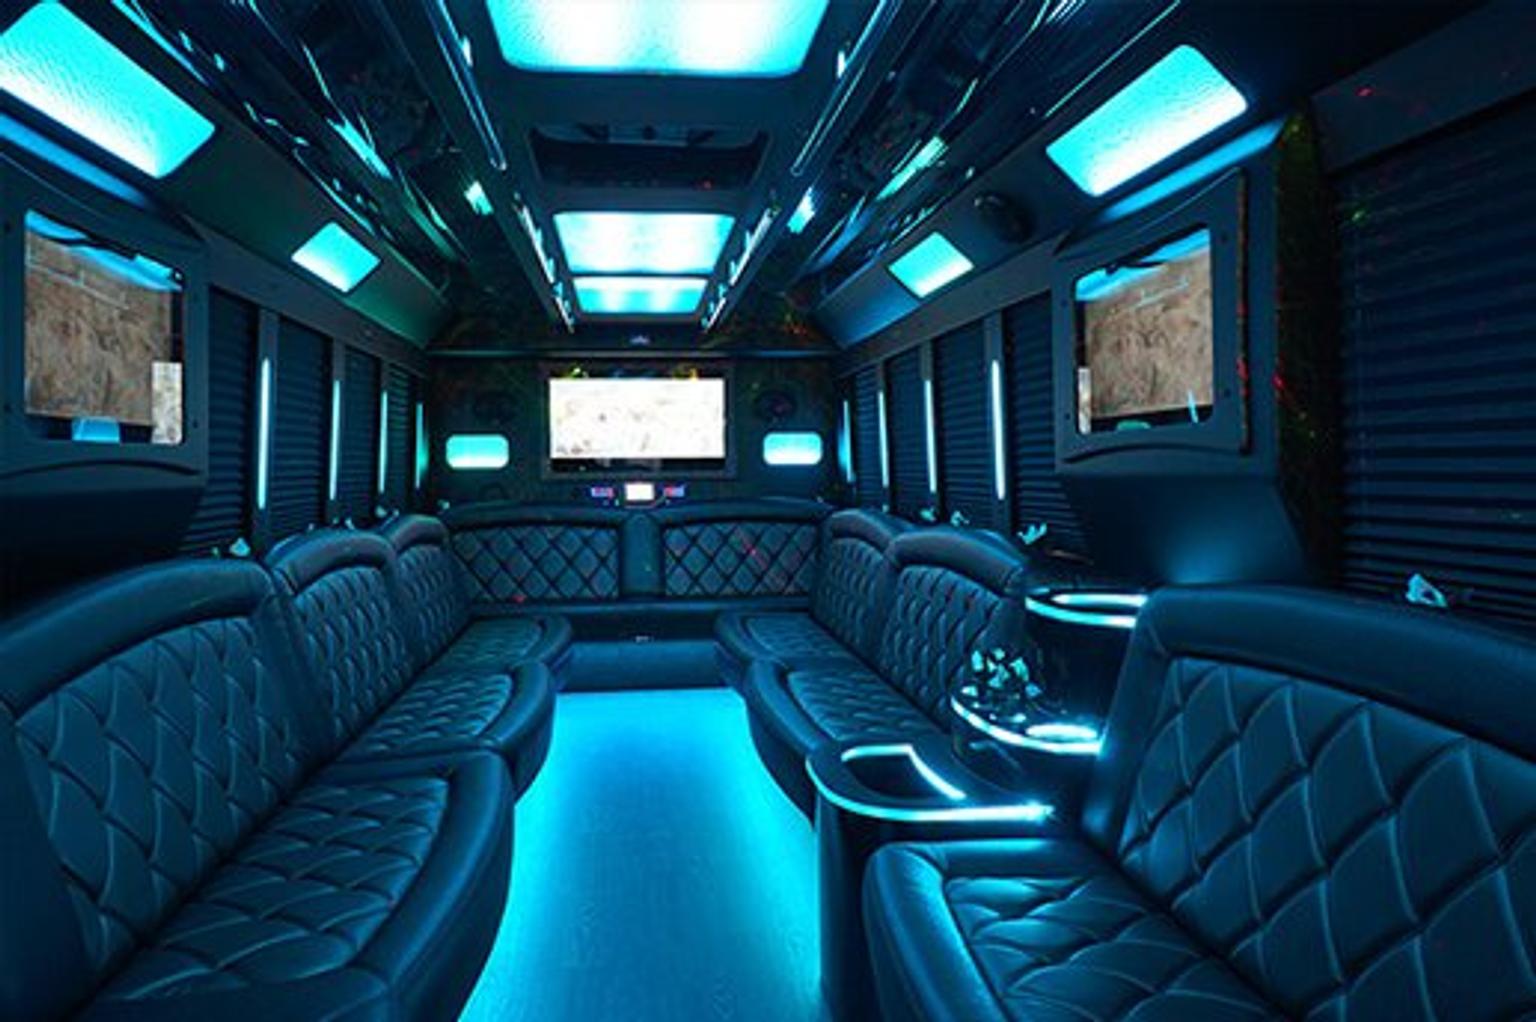 Limo Party Bus Services In Ls6 Leeds Fur 75 00 Zum